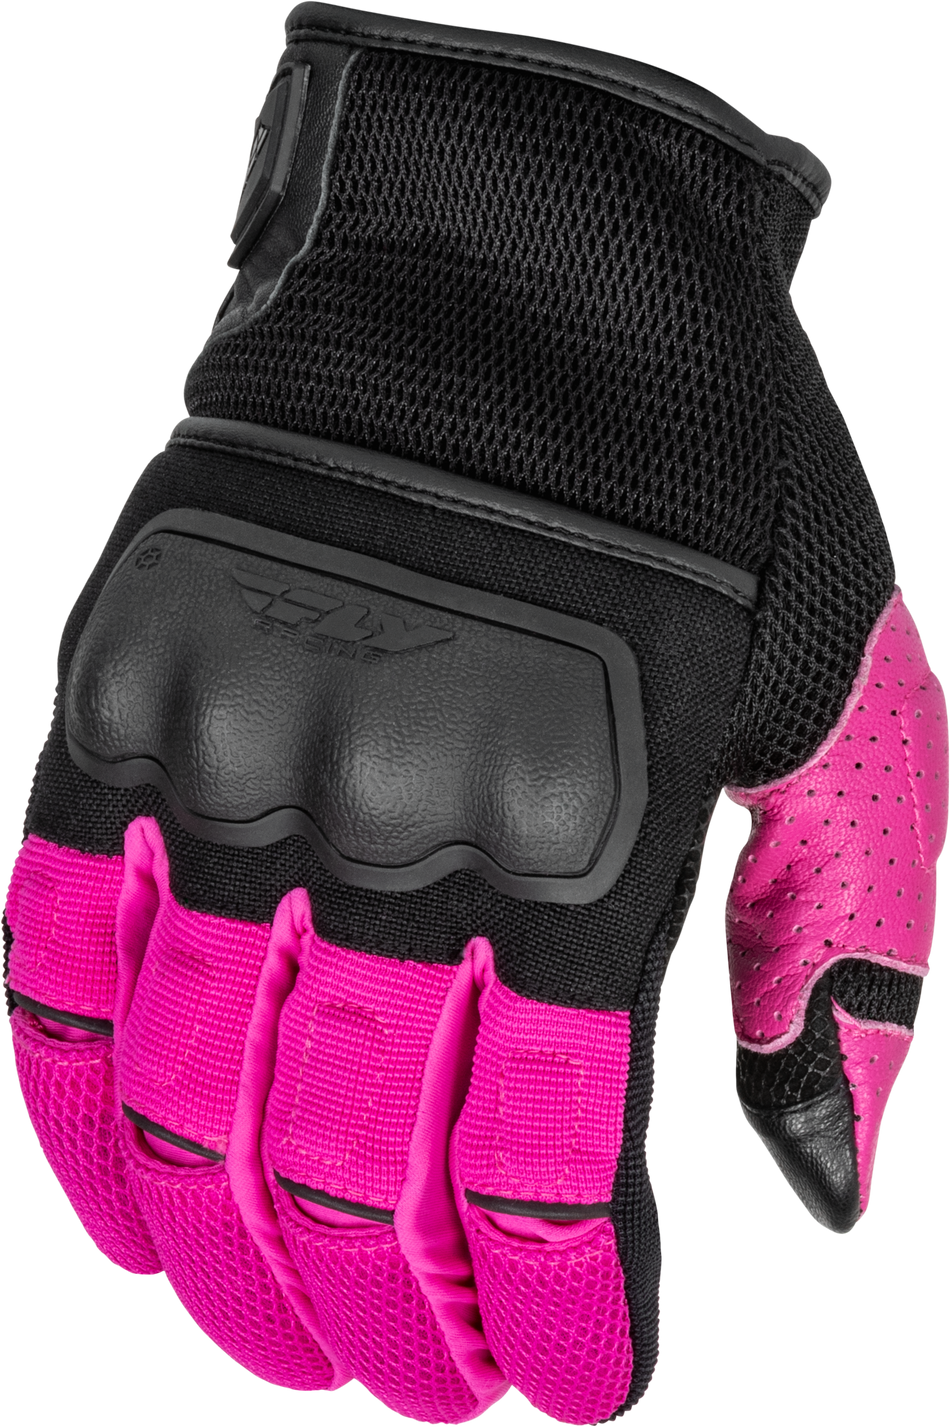 FLY RACING Women's Coolpro Force Gloves Black/Pink Md 476-6302M